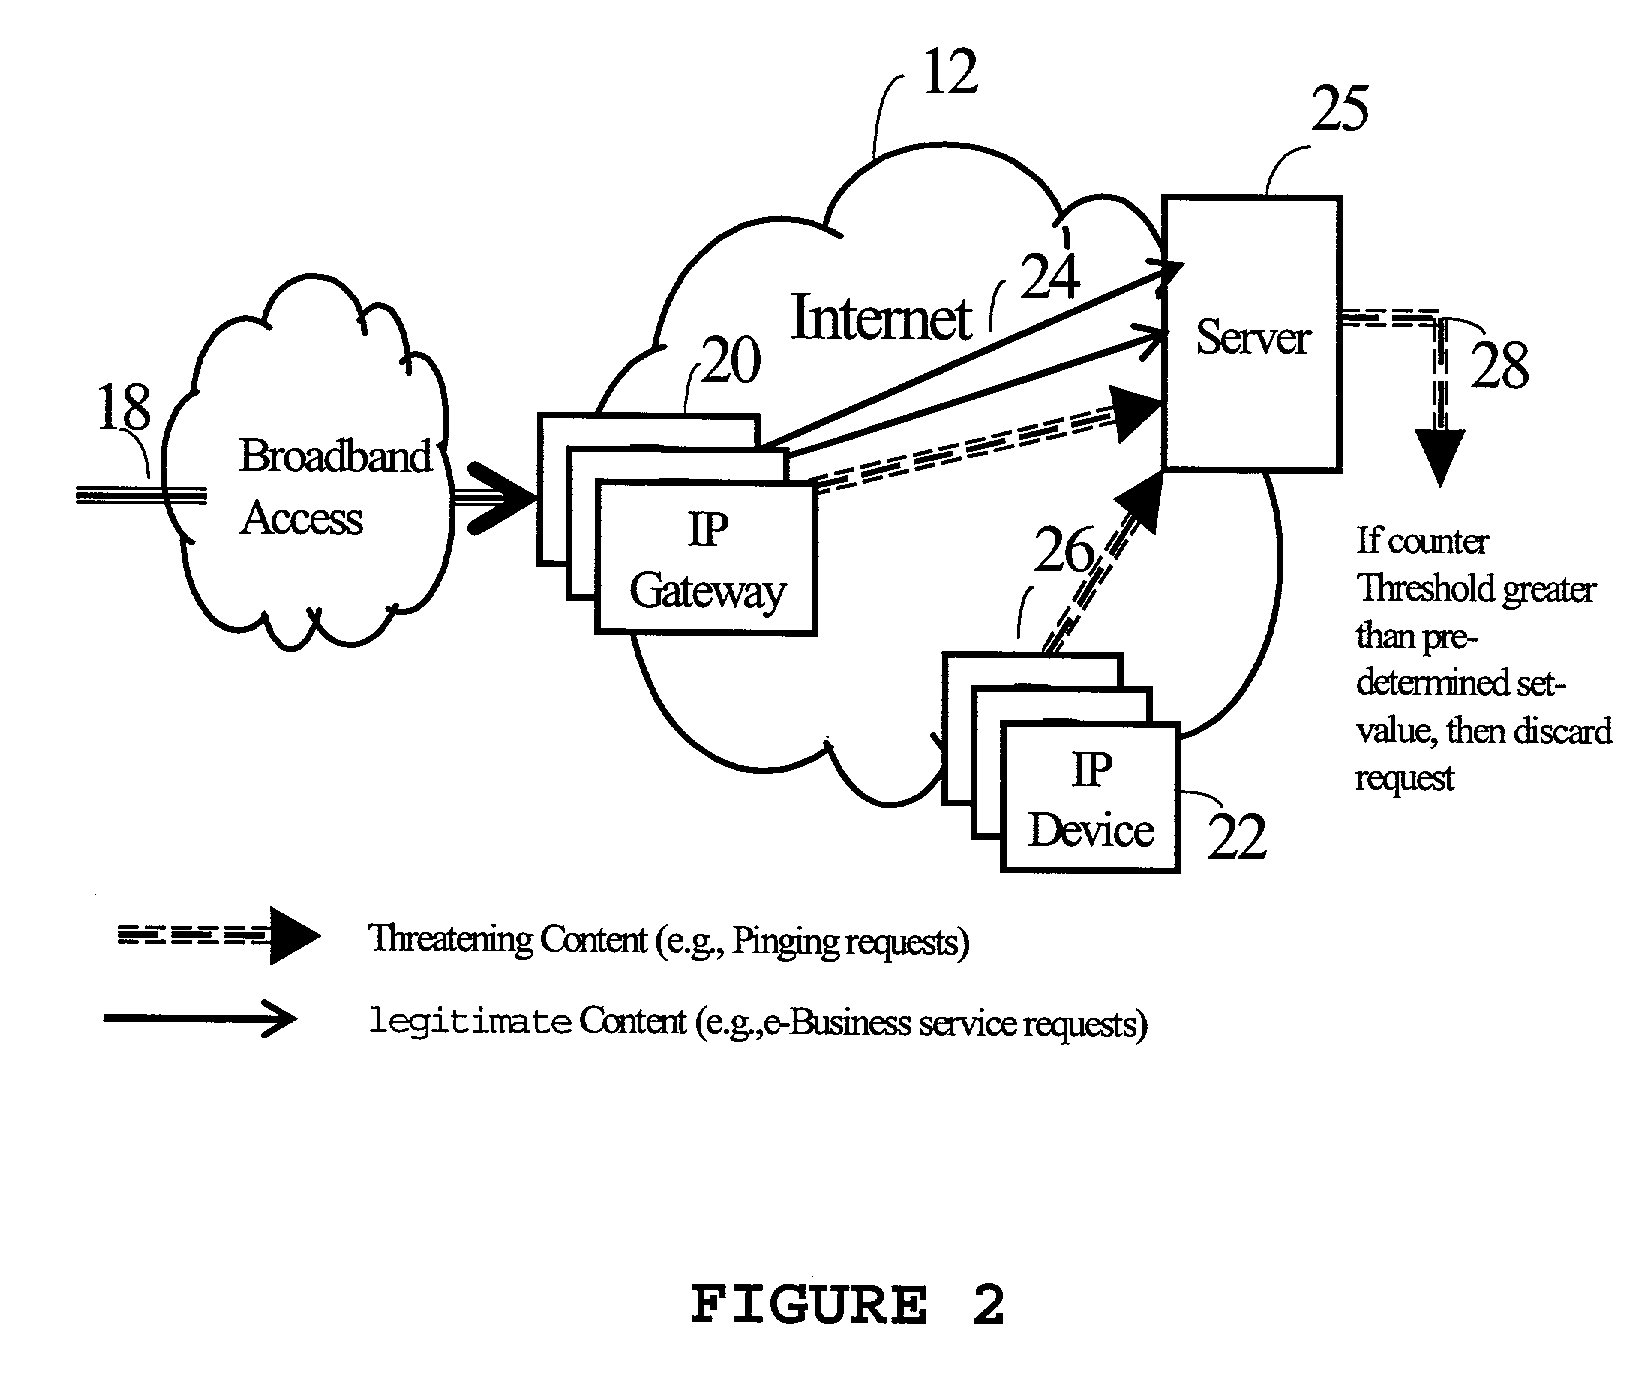 Method and apparatus for security management in a networked environment